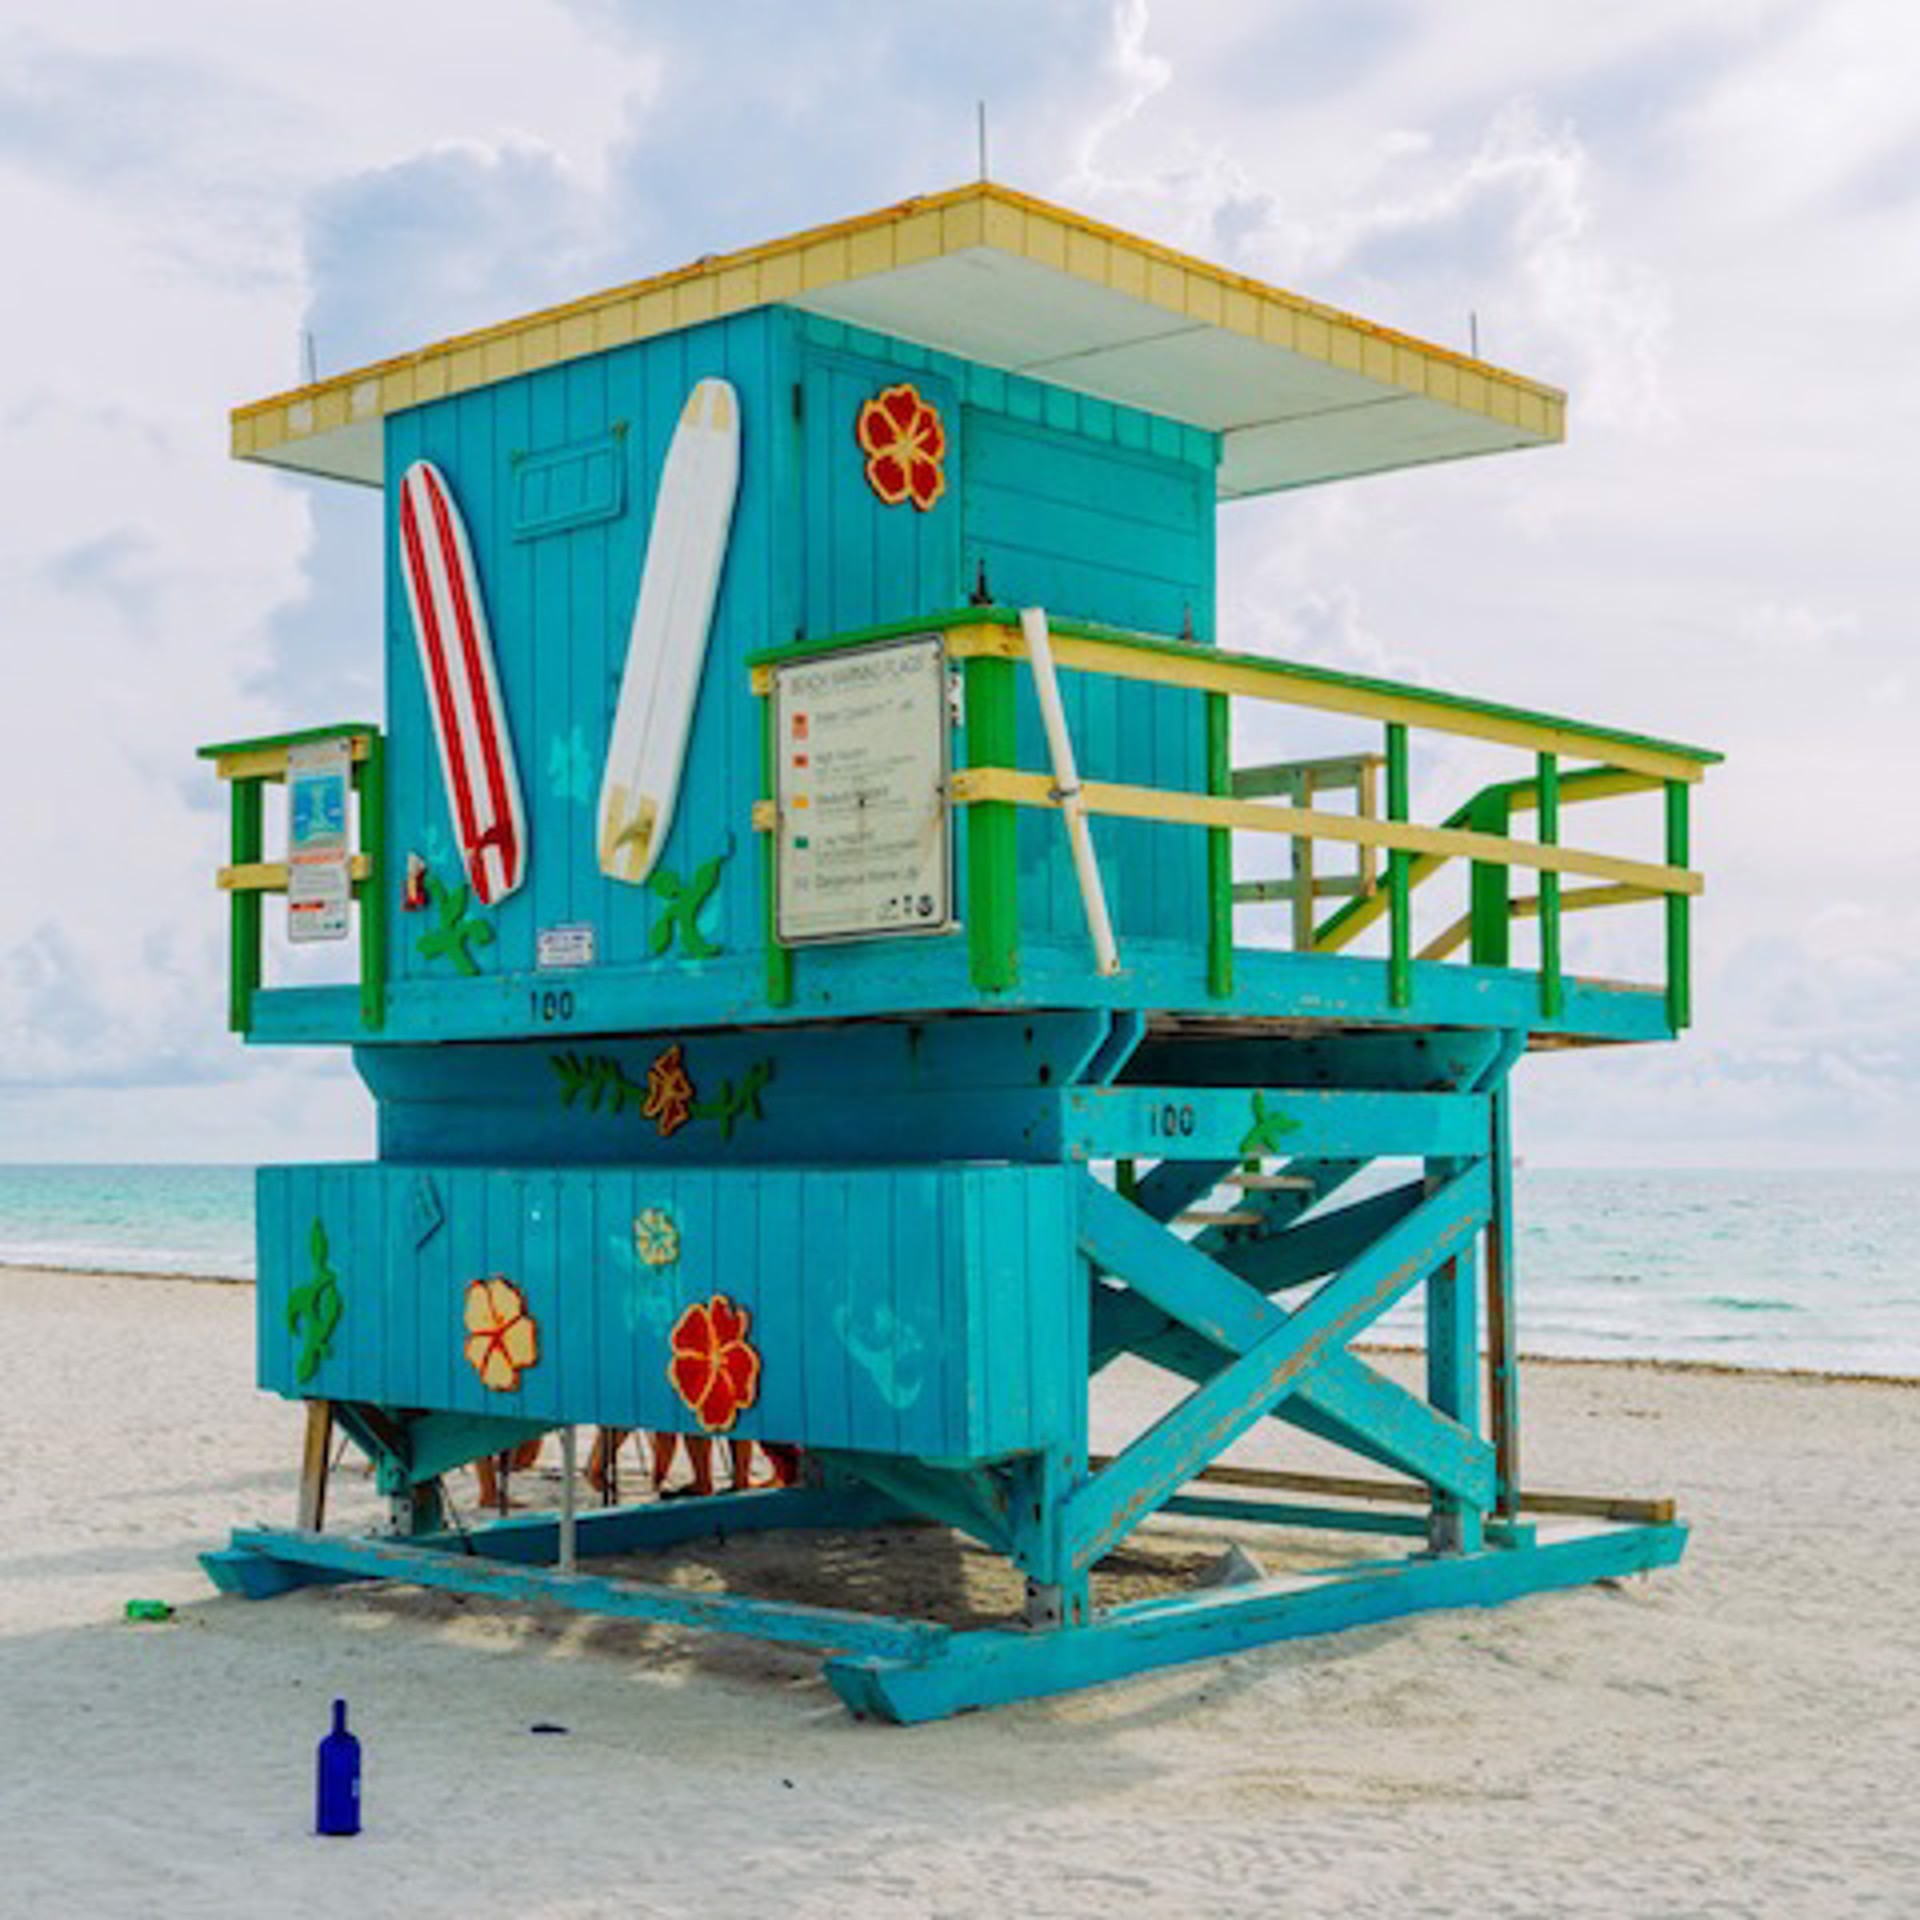 100 Lifeguard Stand by Peter Mendelson